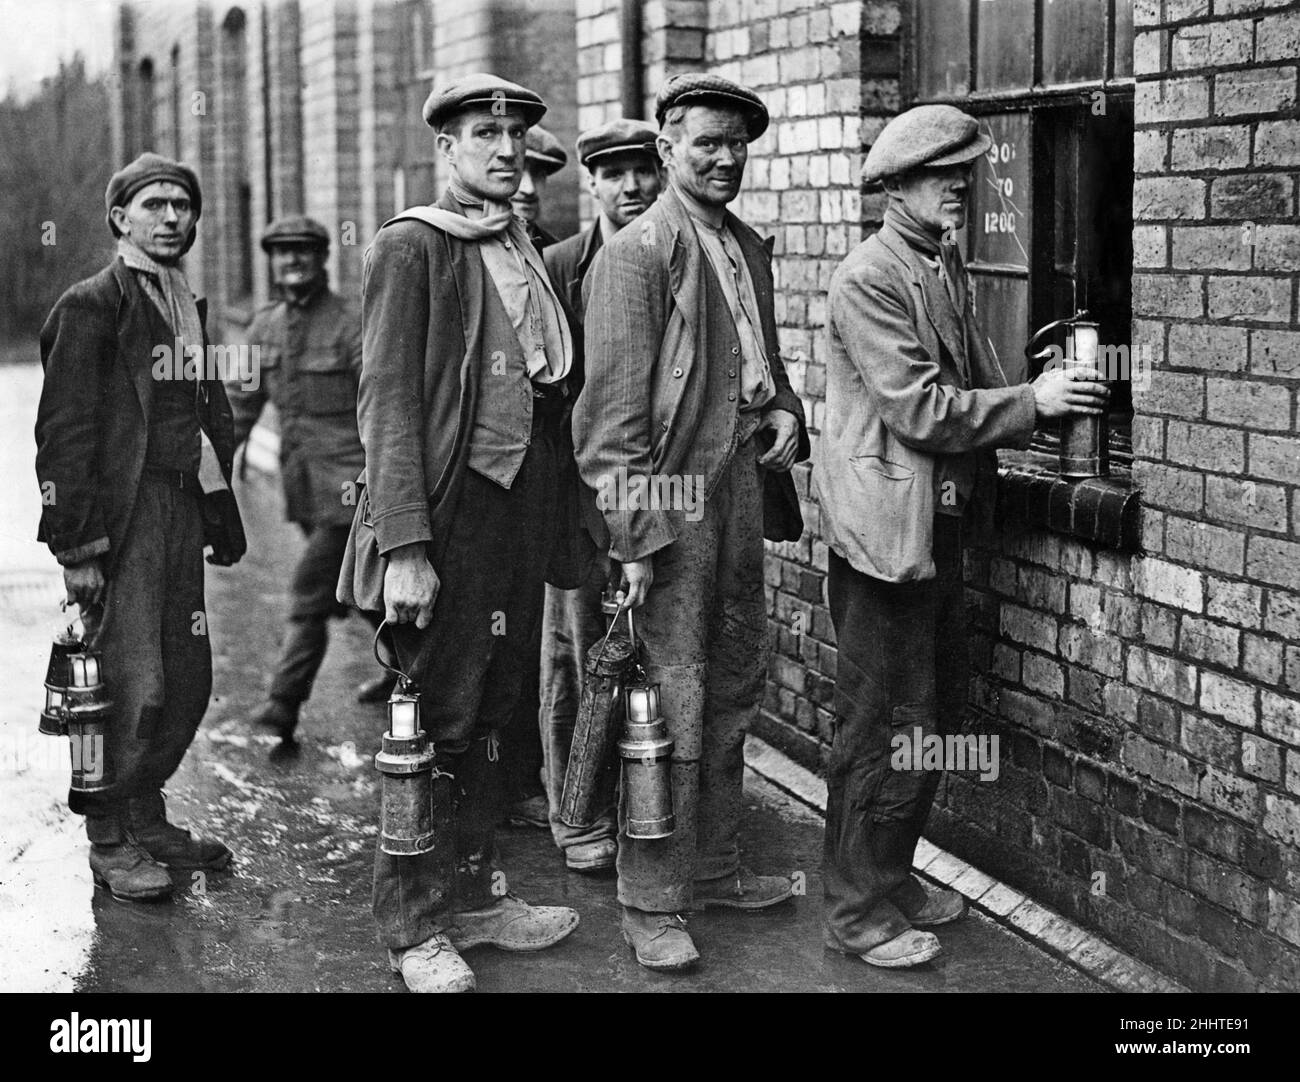 miners-at-the-cannock-wood-pit-handing-in-their-davy-lamps-and-lanterns-at-the-end-of-their-sh...jpg